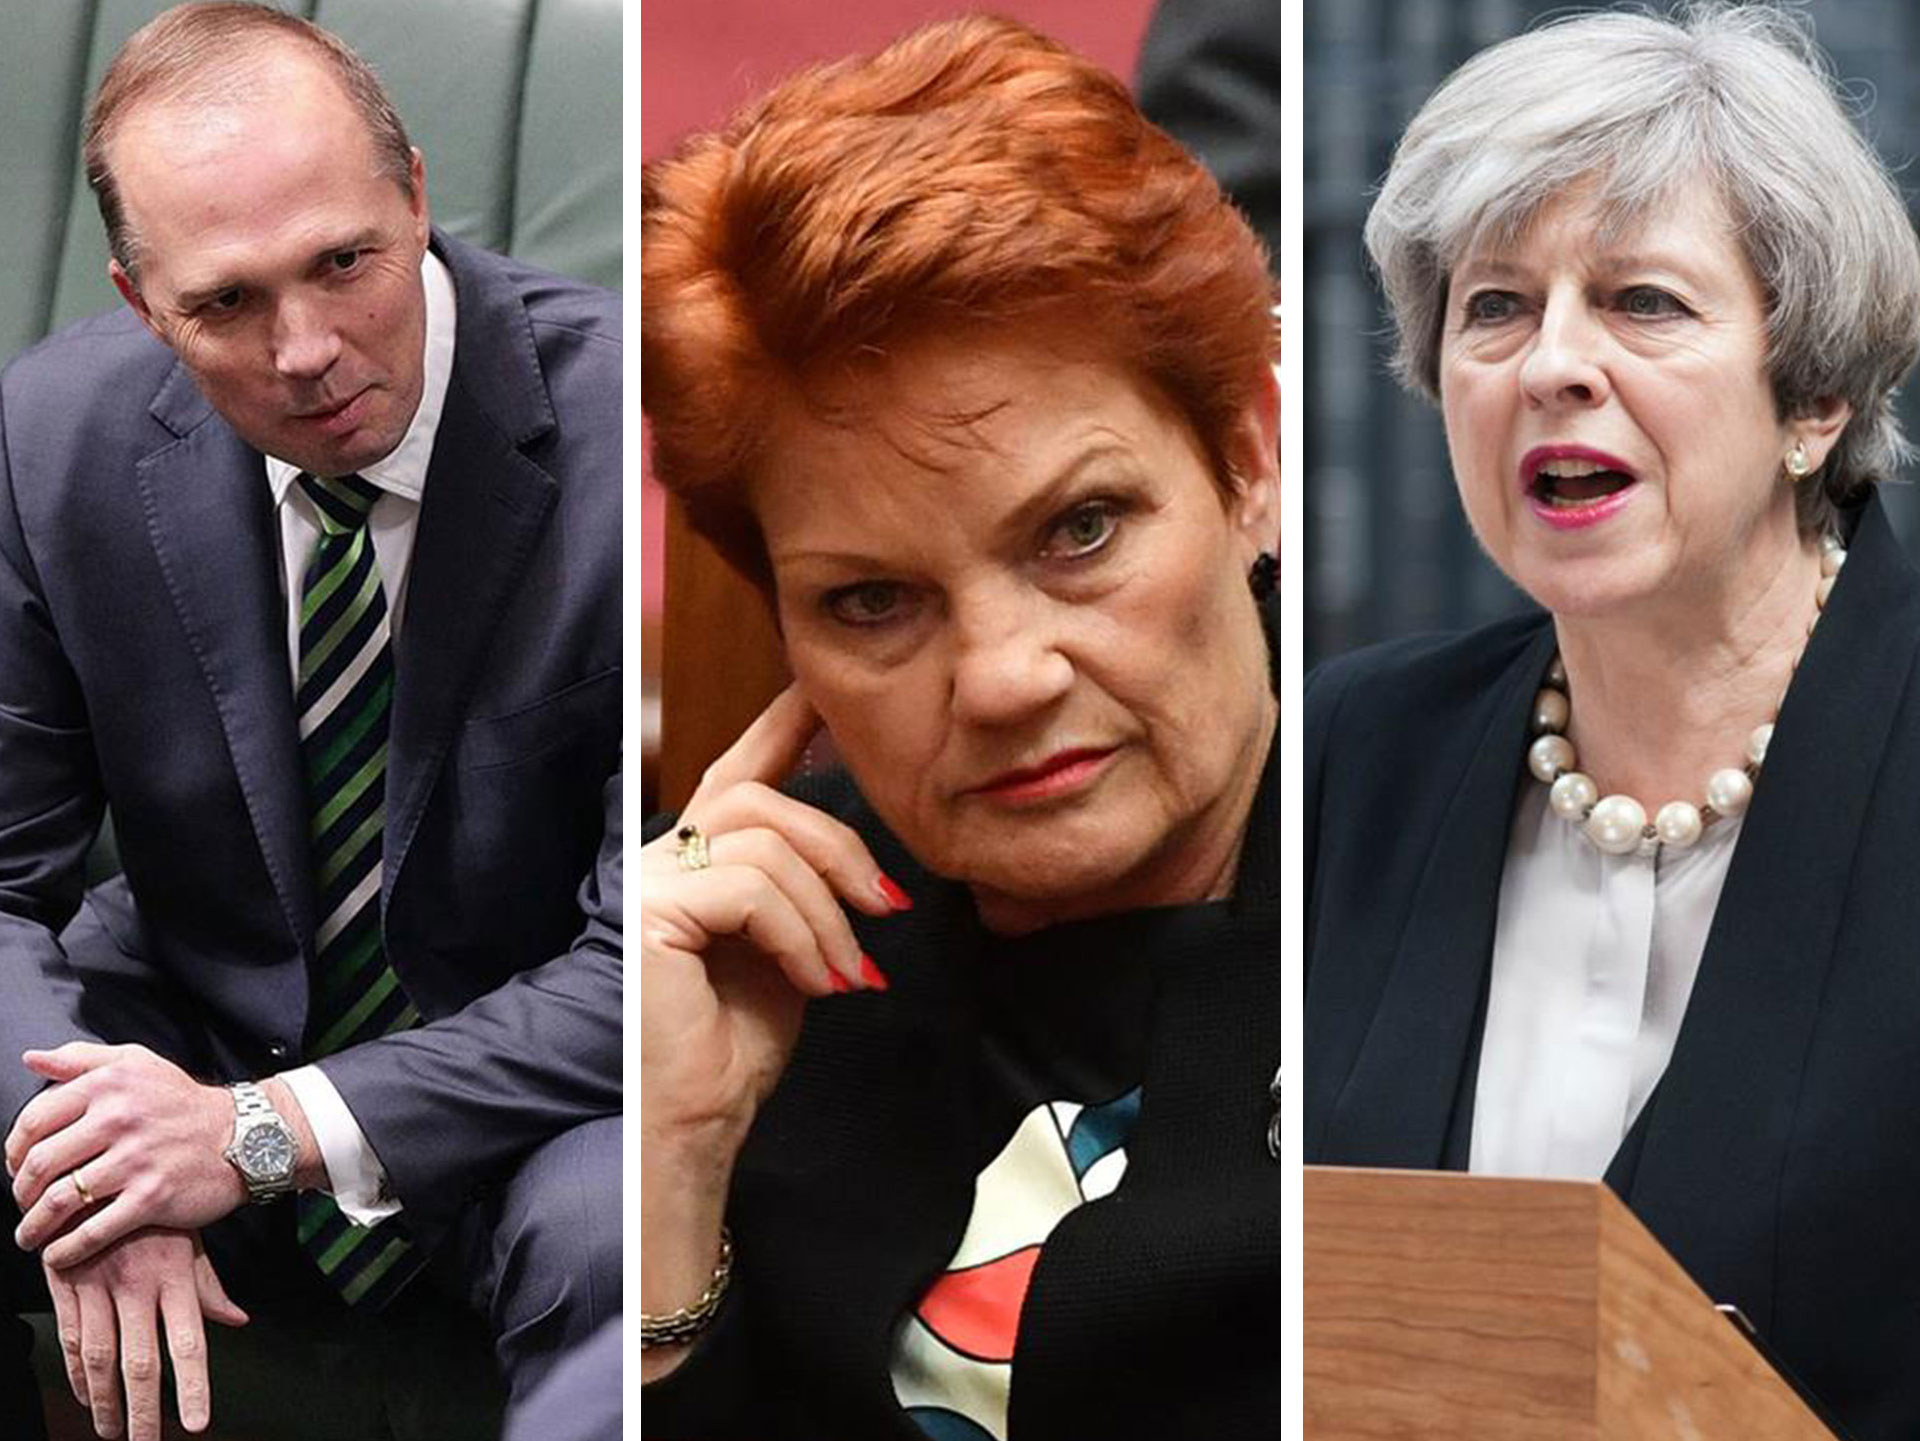 When will Australia start punishing politicians for racist comments?